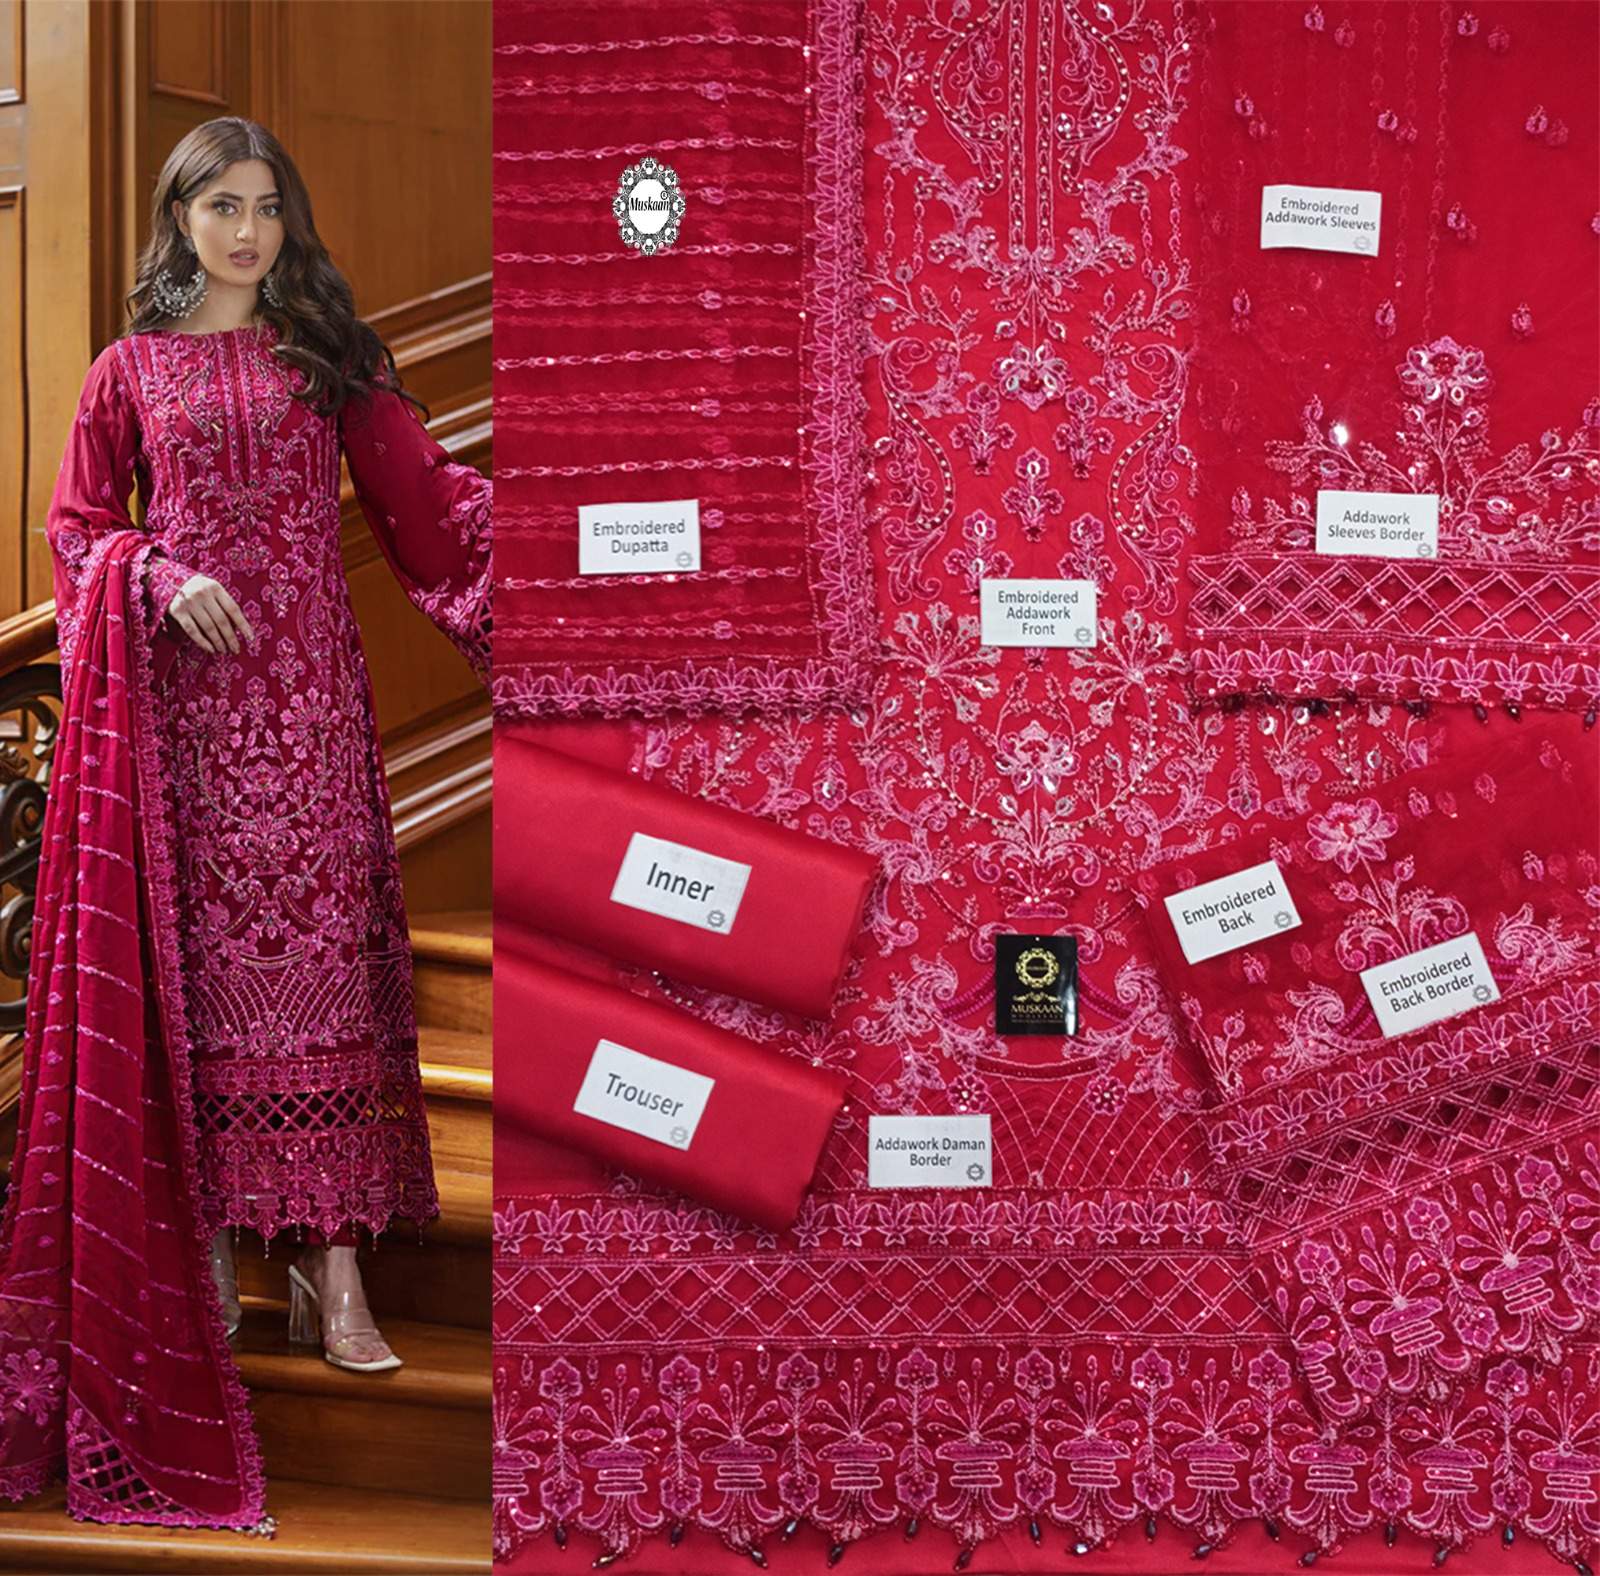 Red Emaan Adeel Addawork Embroidered Dress